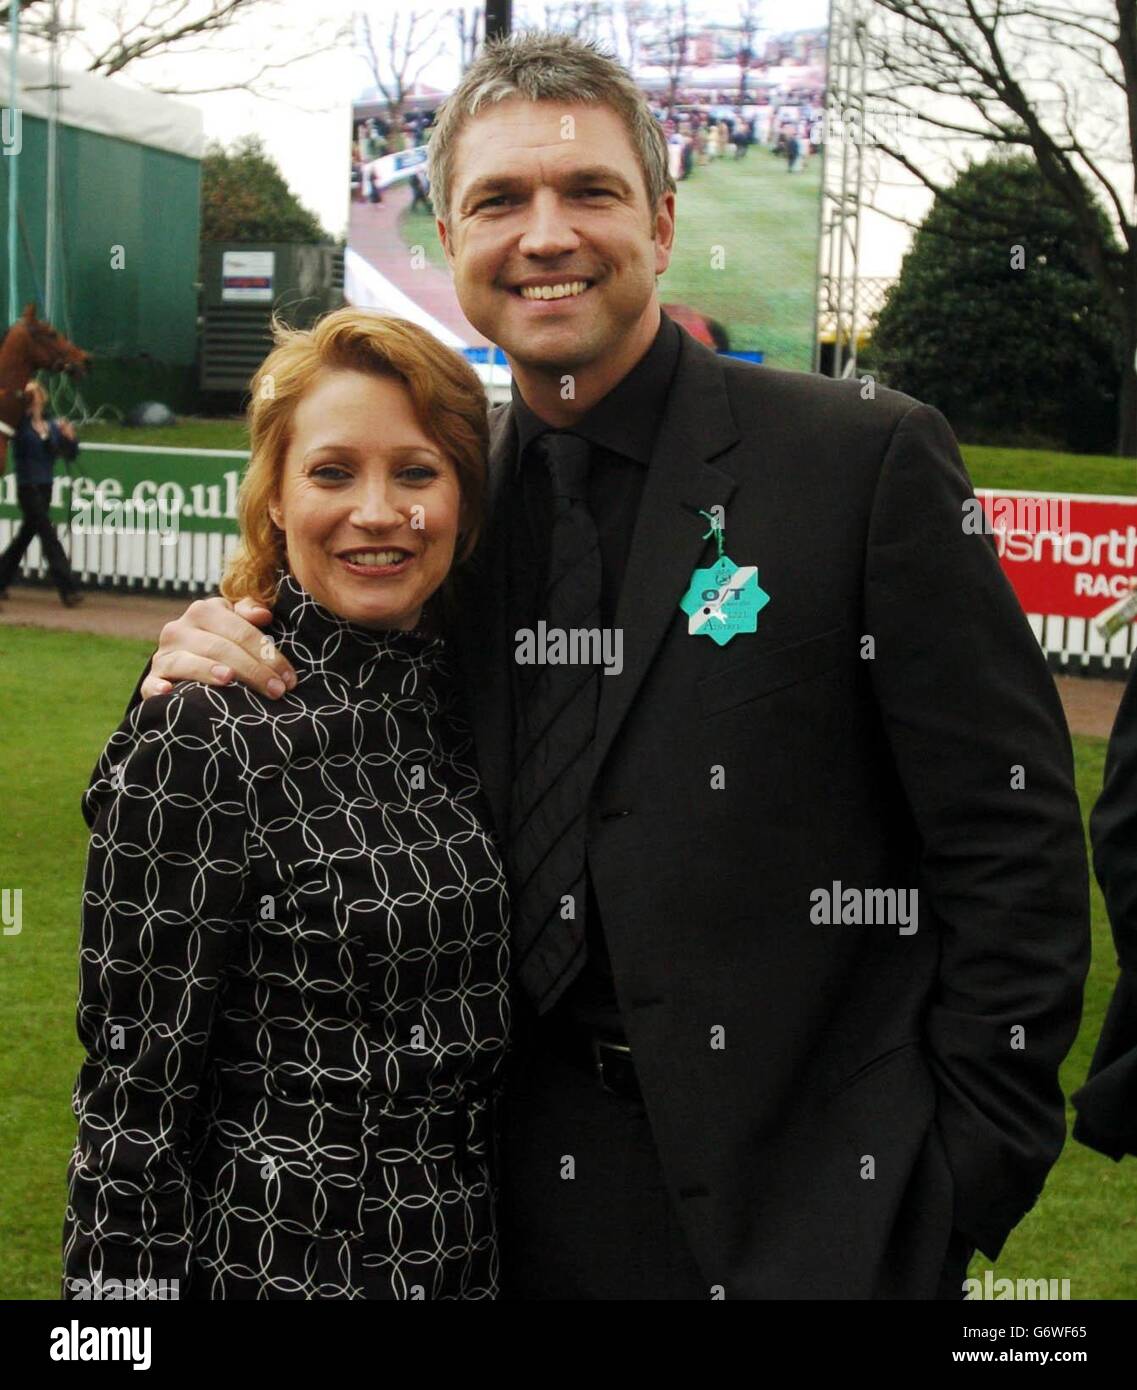 Former footballer Alan Miller and former Emmerdale star Malandra Burrows at Aintree racecourse. Stock Photo